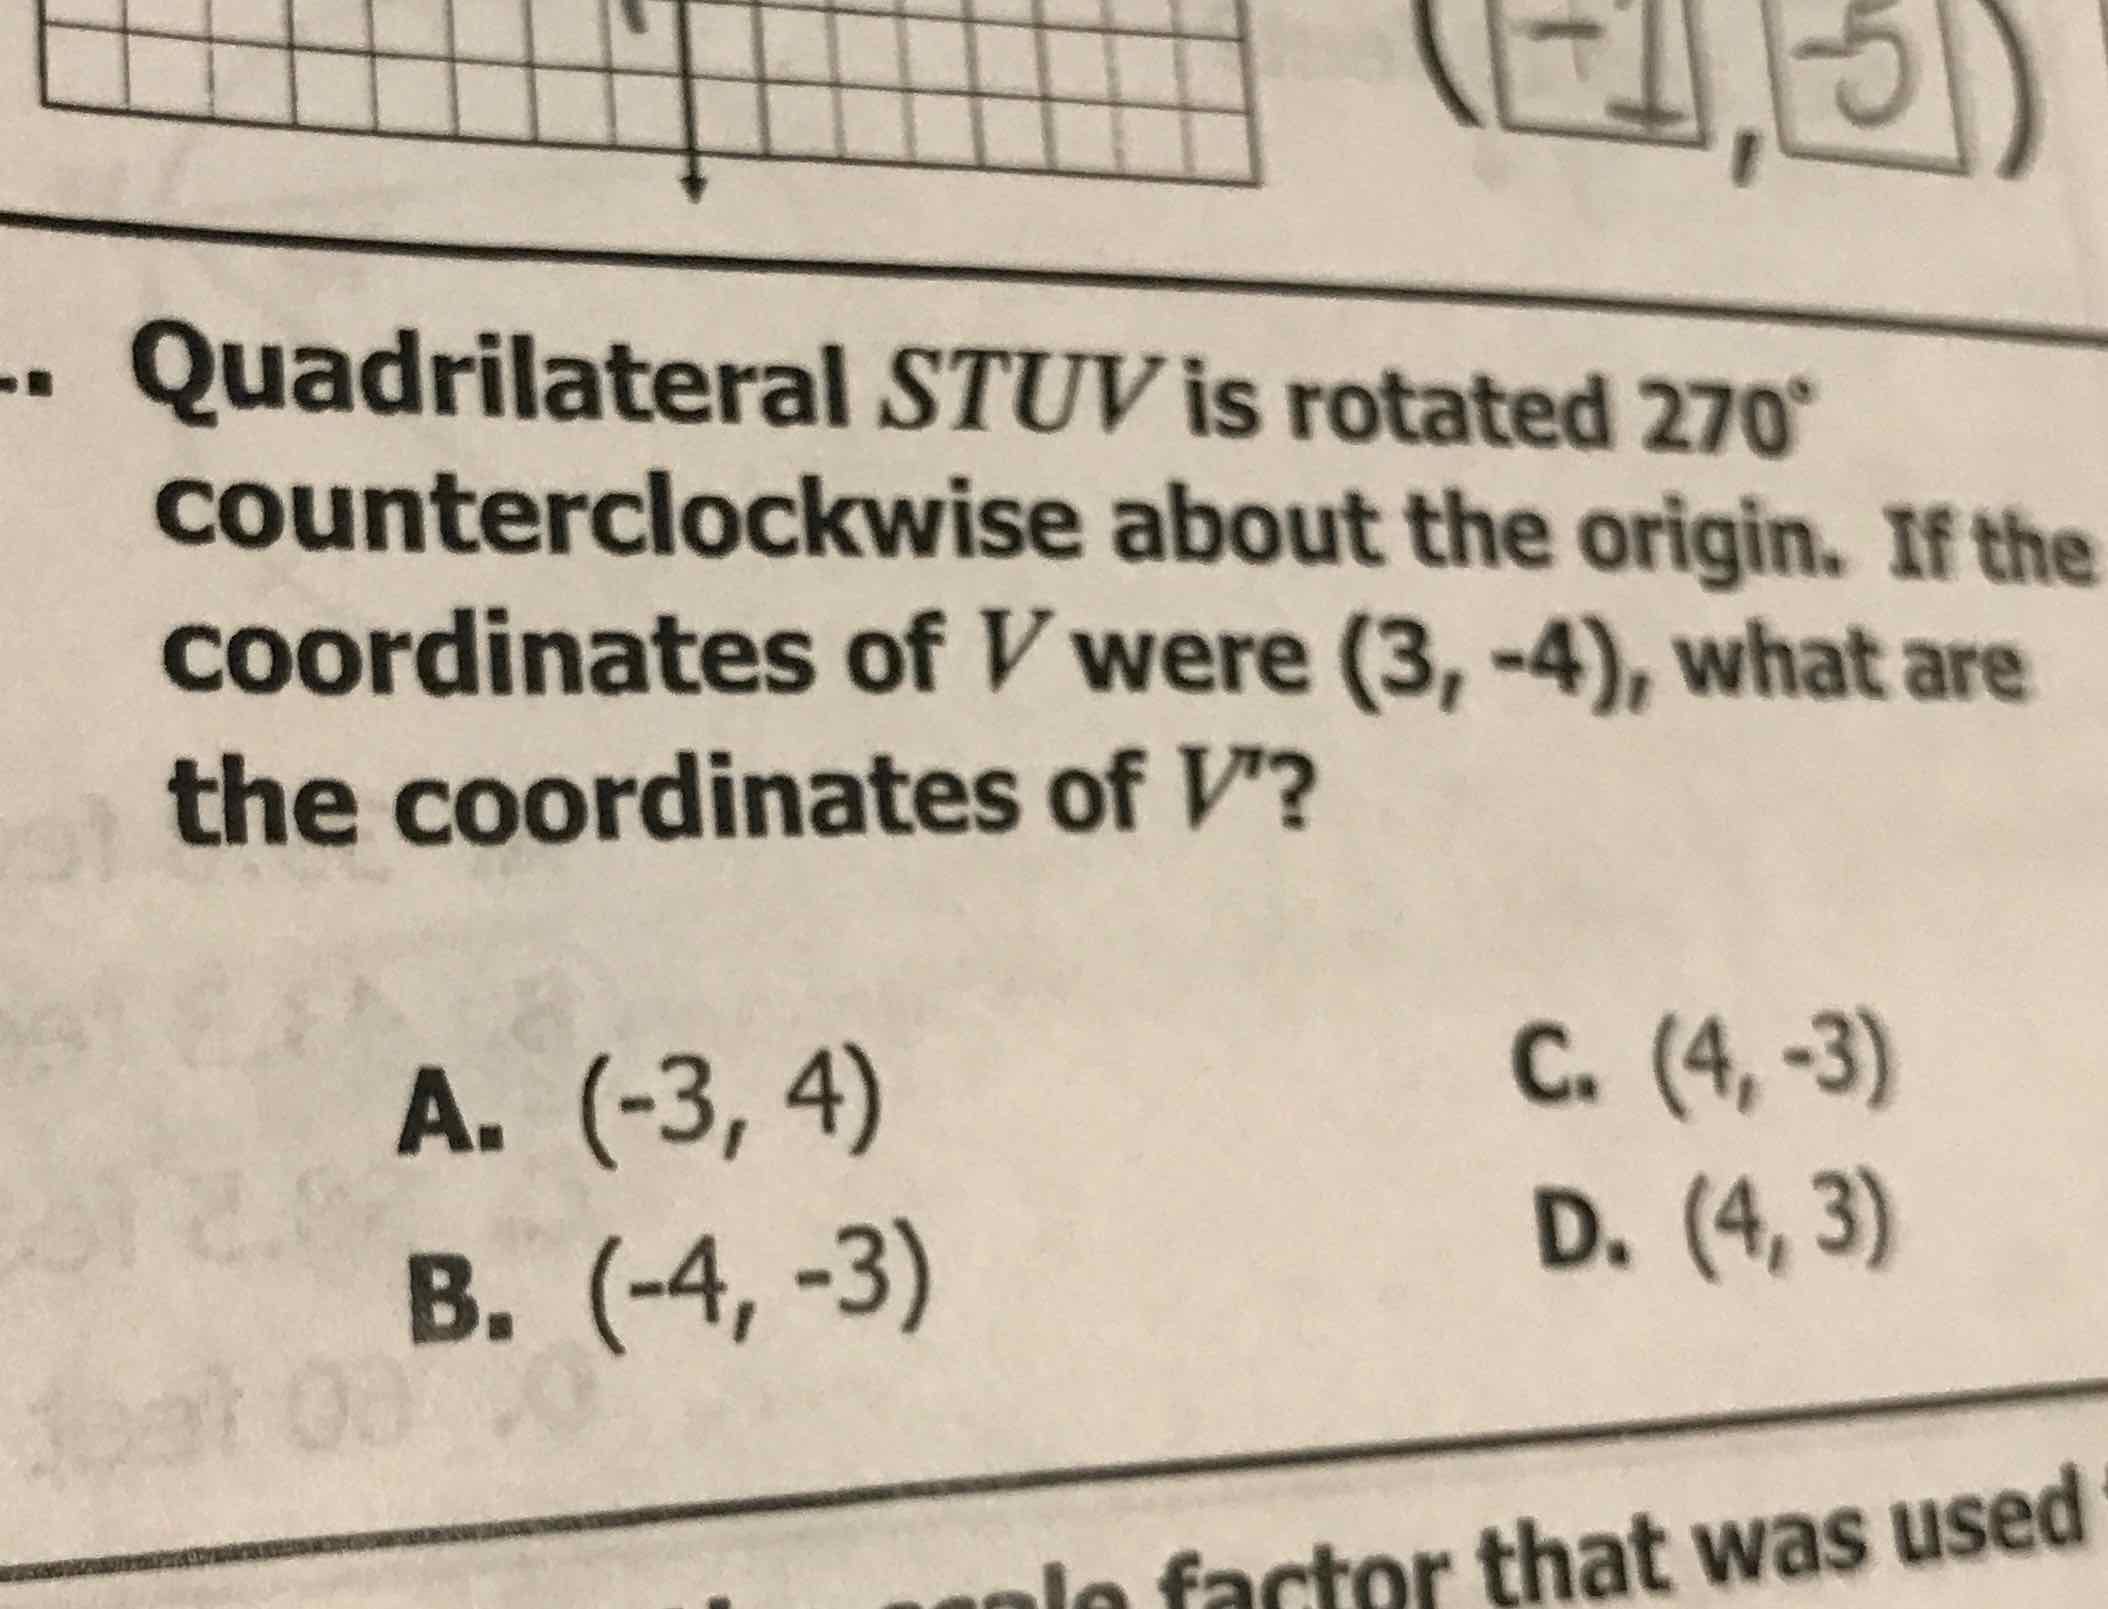 Quadrilateral STUV is rotated \( 270^{\circ} \) counterclockwise about the origin. If the coordinates of \( V \) were \( (3,-4) \), what are the coordinates of \( V^{\prime} \) ?
A. \( (-3,4) \)
C. \( (4,-3) \)
B. \( (-4,-3) \)
D. \( (4,3) \)